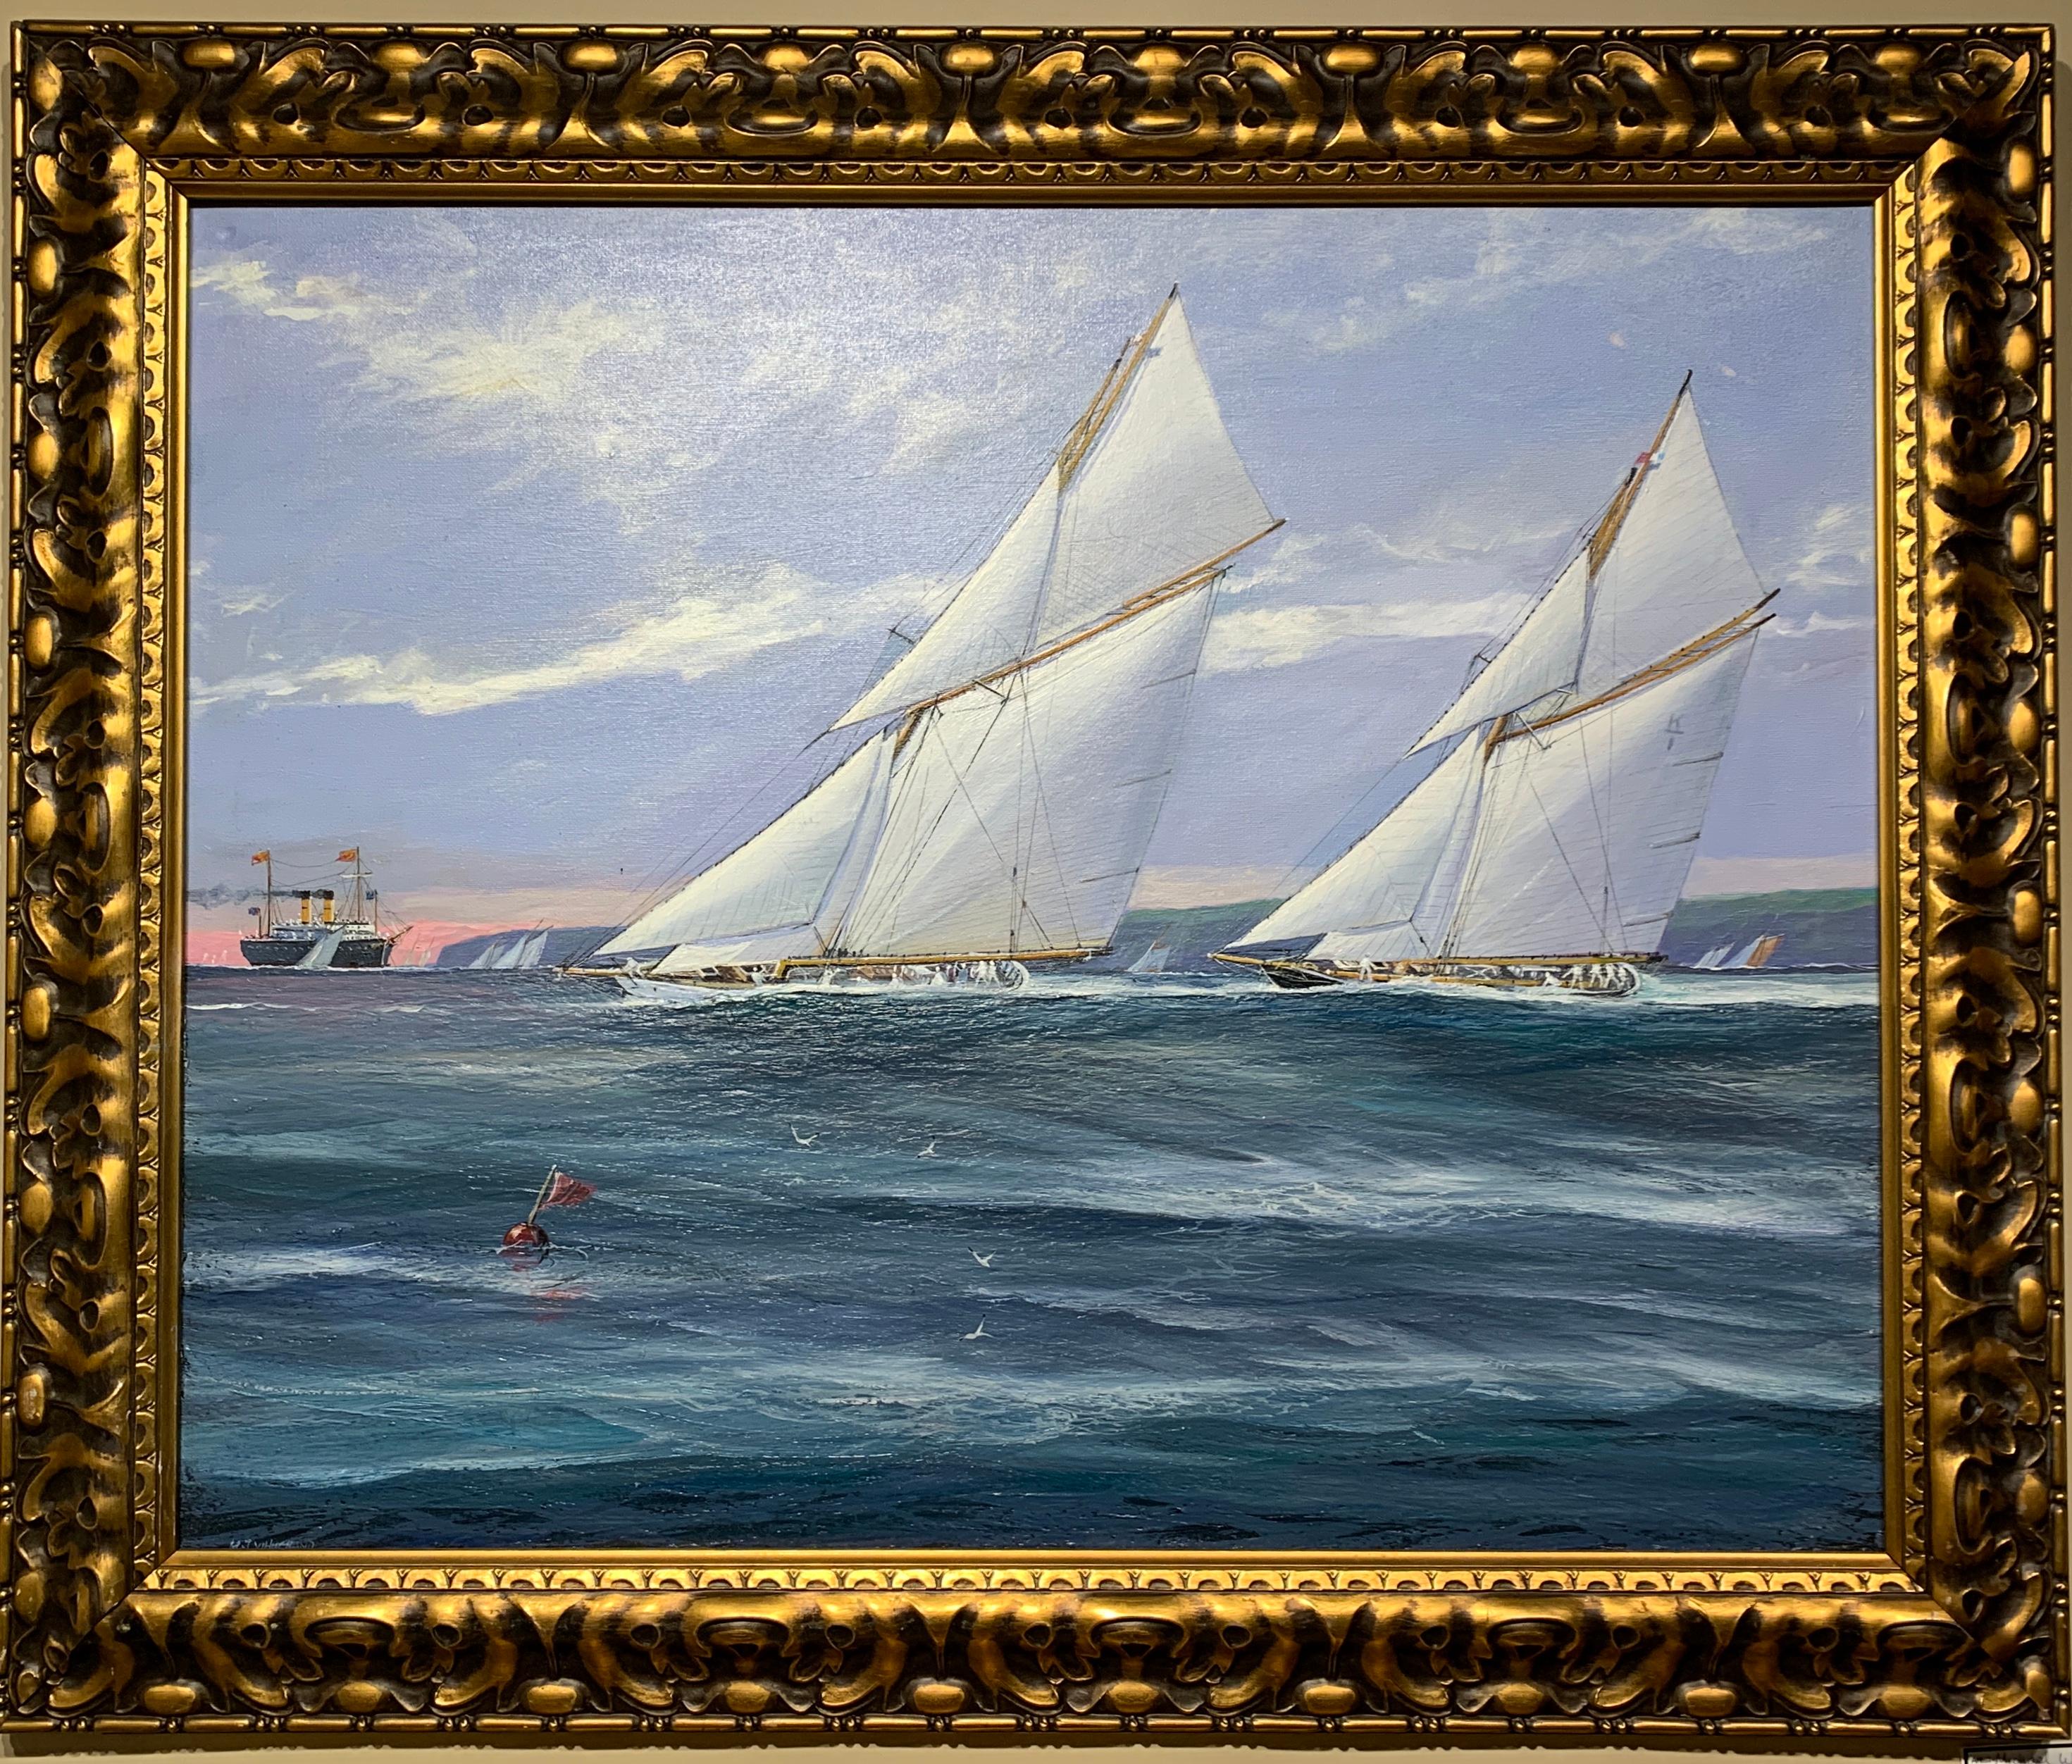 Michael Whitehand Portrait Painting - English Impressionist yacht race with HMY Britannia in English Channel